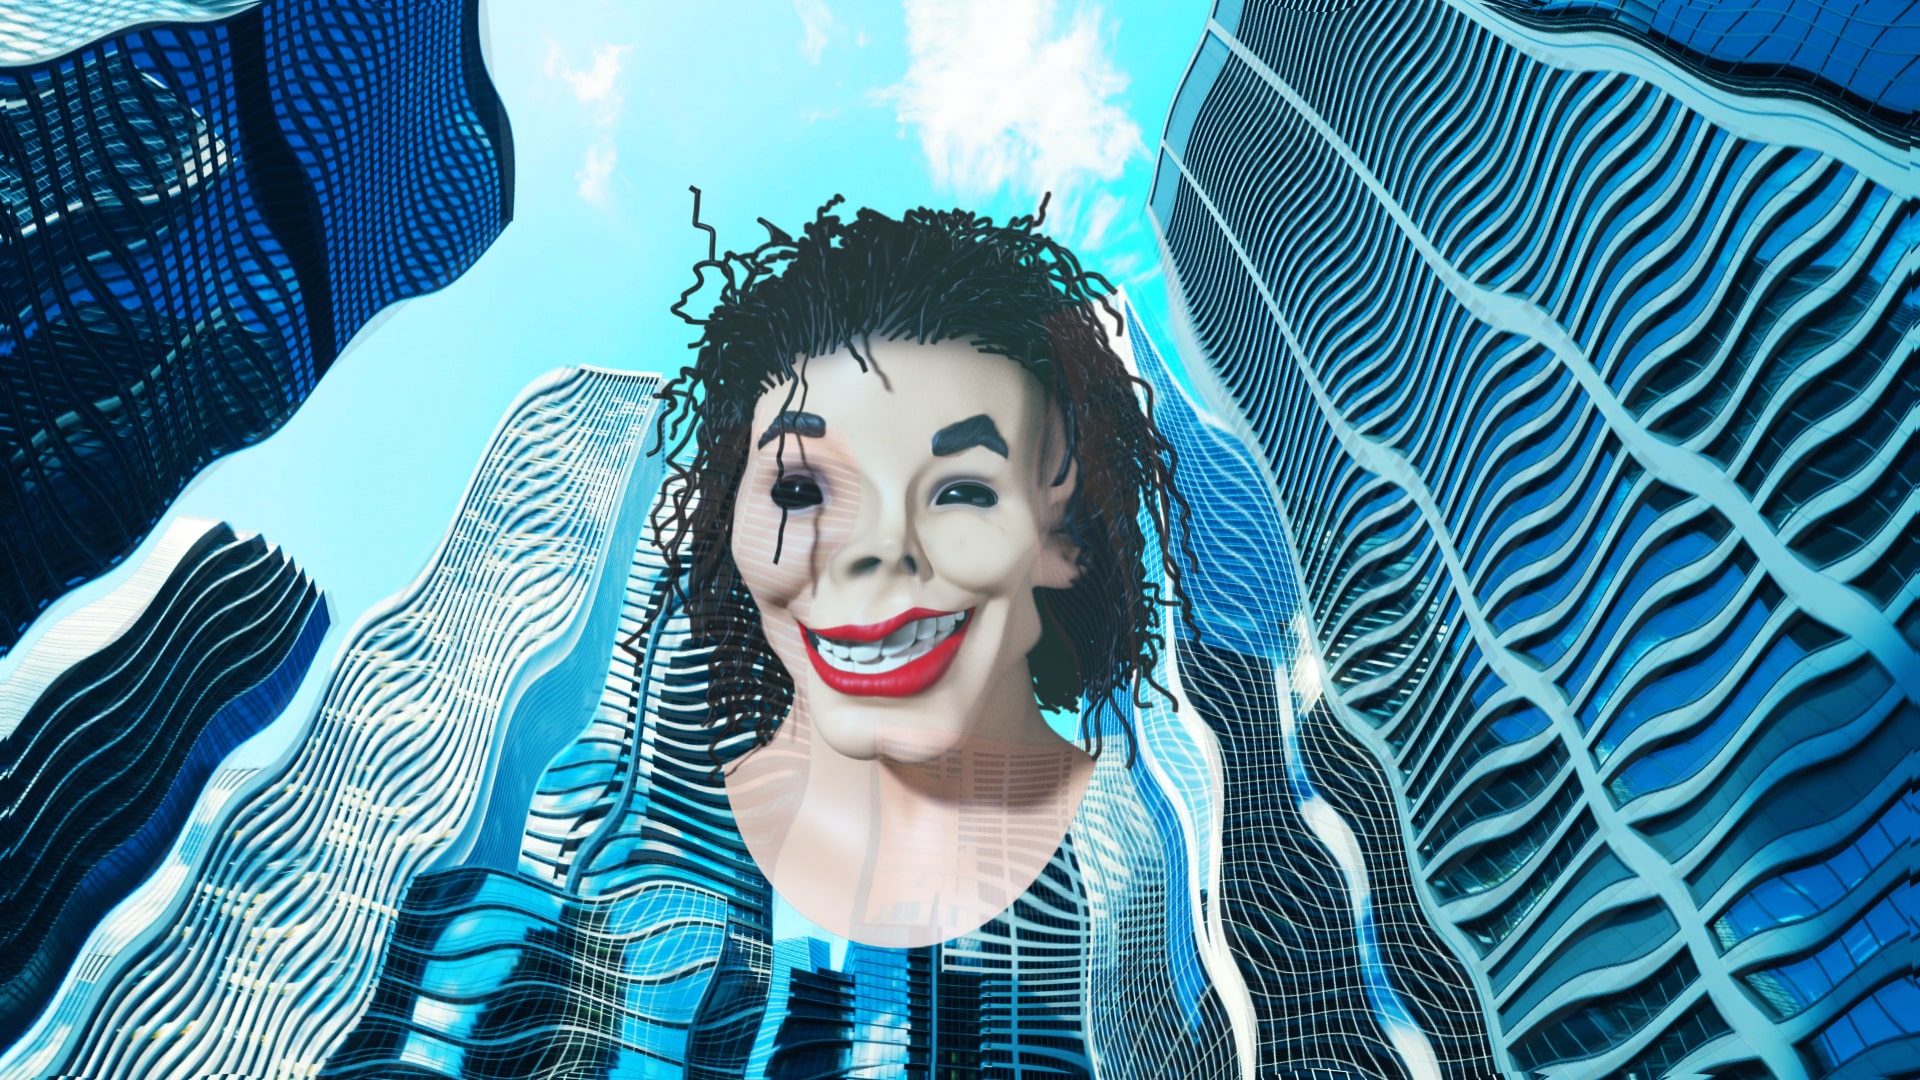 A floating, plastic, seemingly smiling mask of Michael Jackson with pitch black eyes is super-imposed on a distorted landscape of futuristic blue skyscrapers.